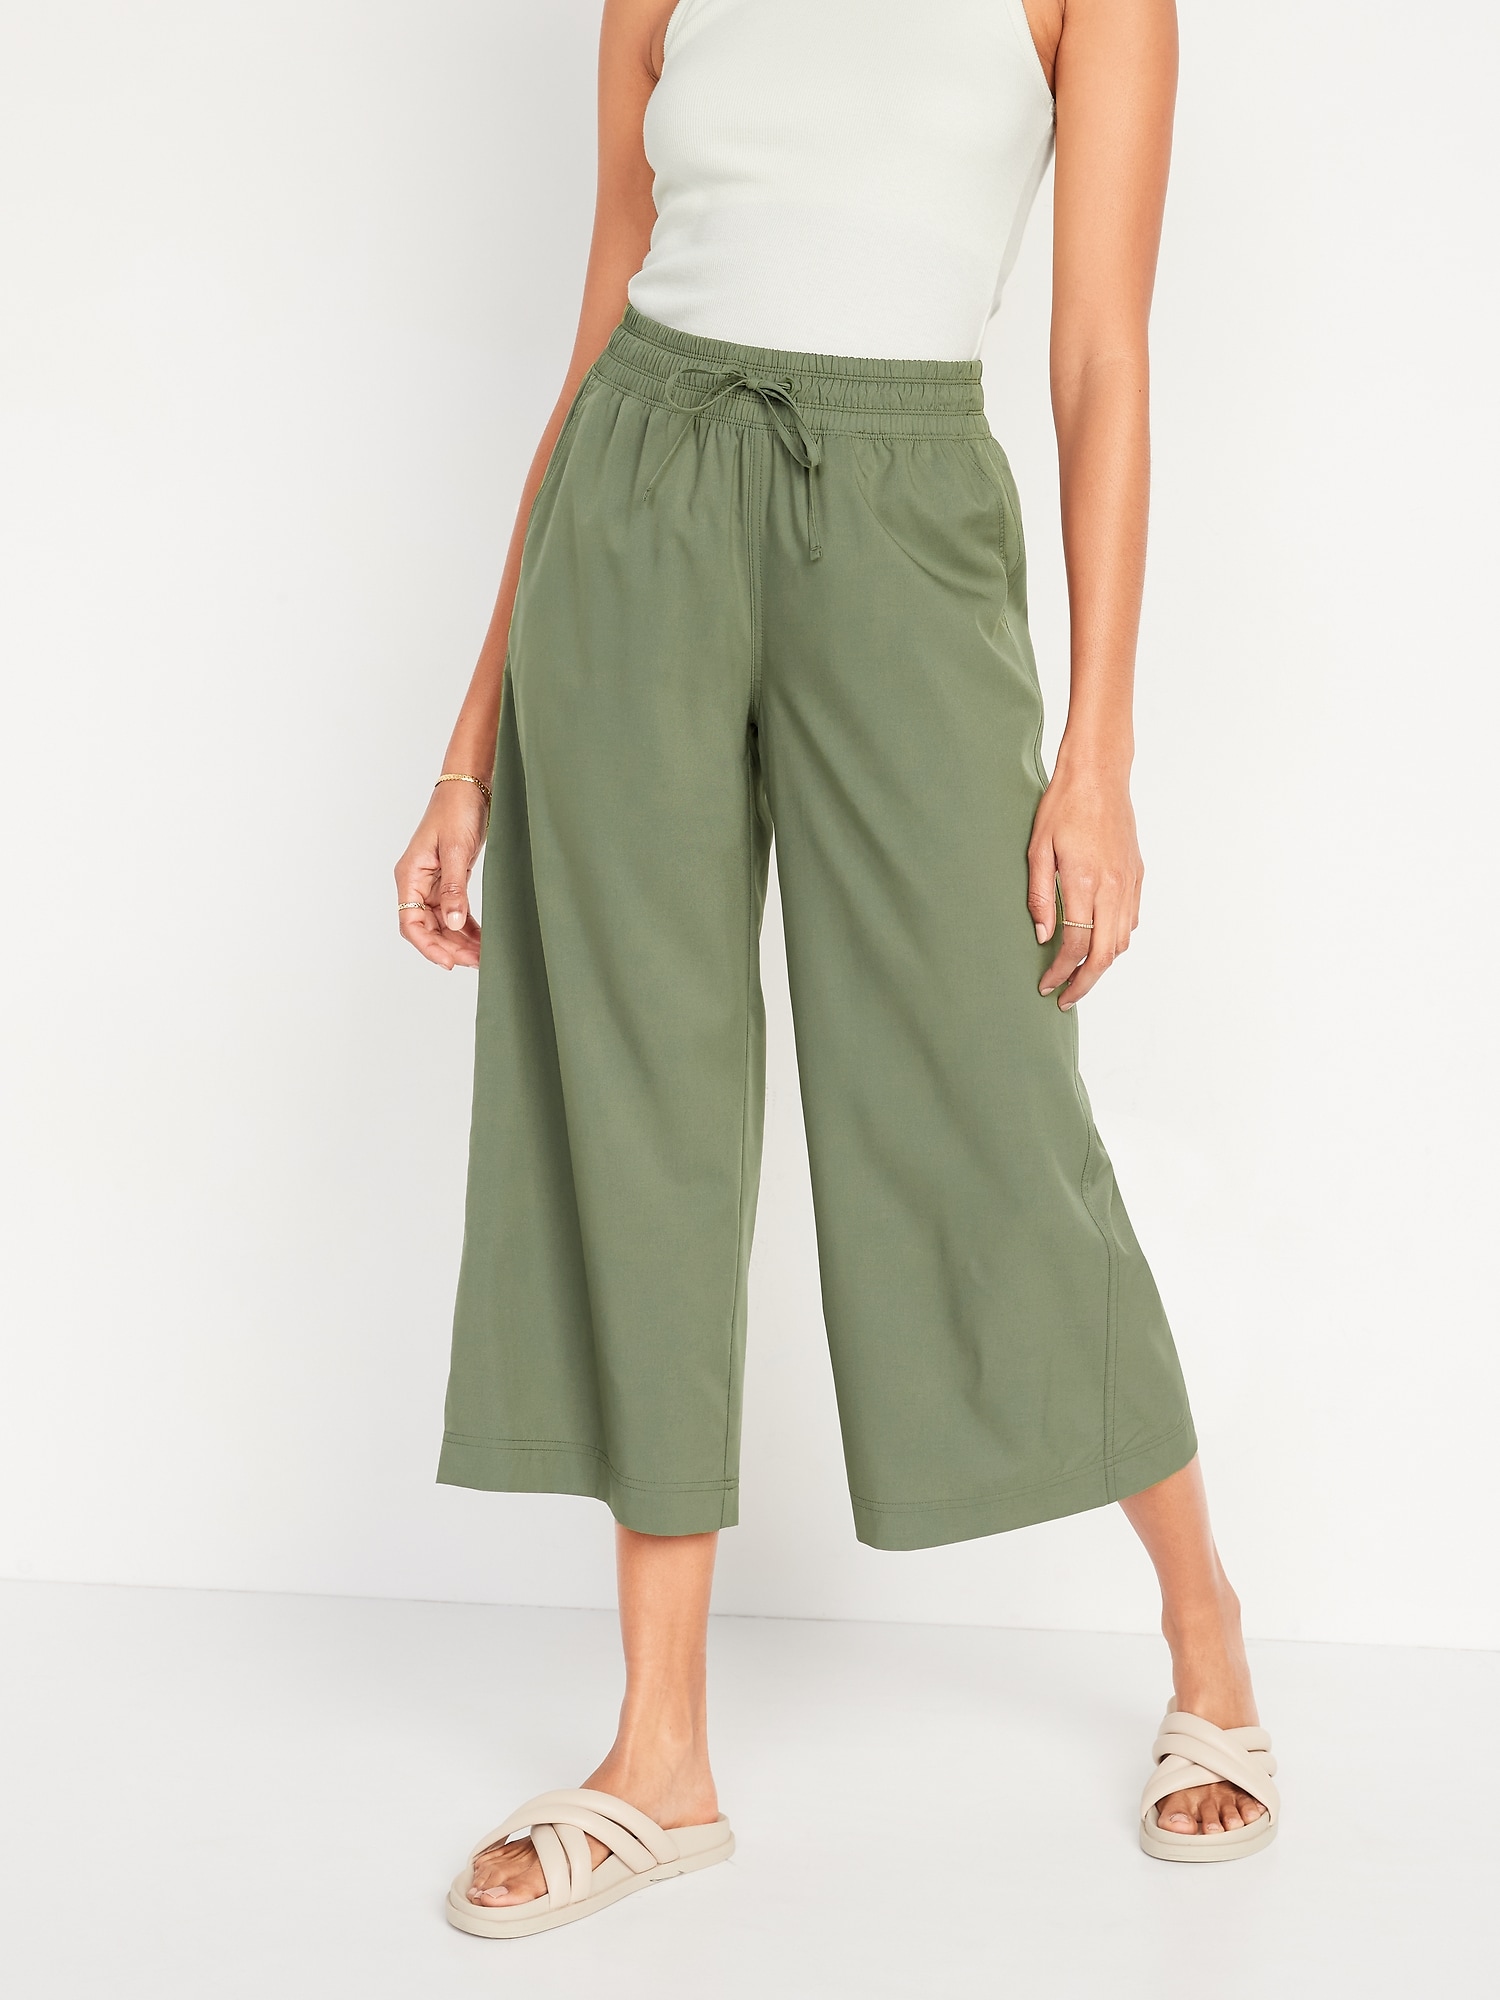 Time and Tru Women's Petite Wide Leg Pants, 28 Inseam for Petite